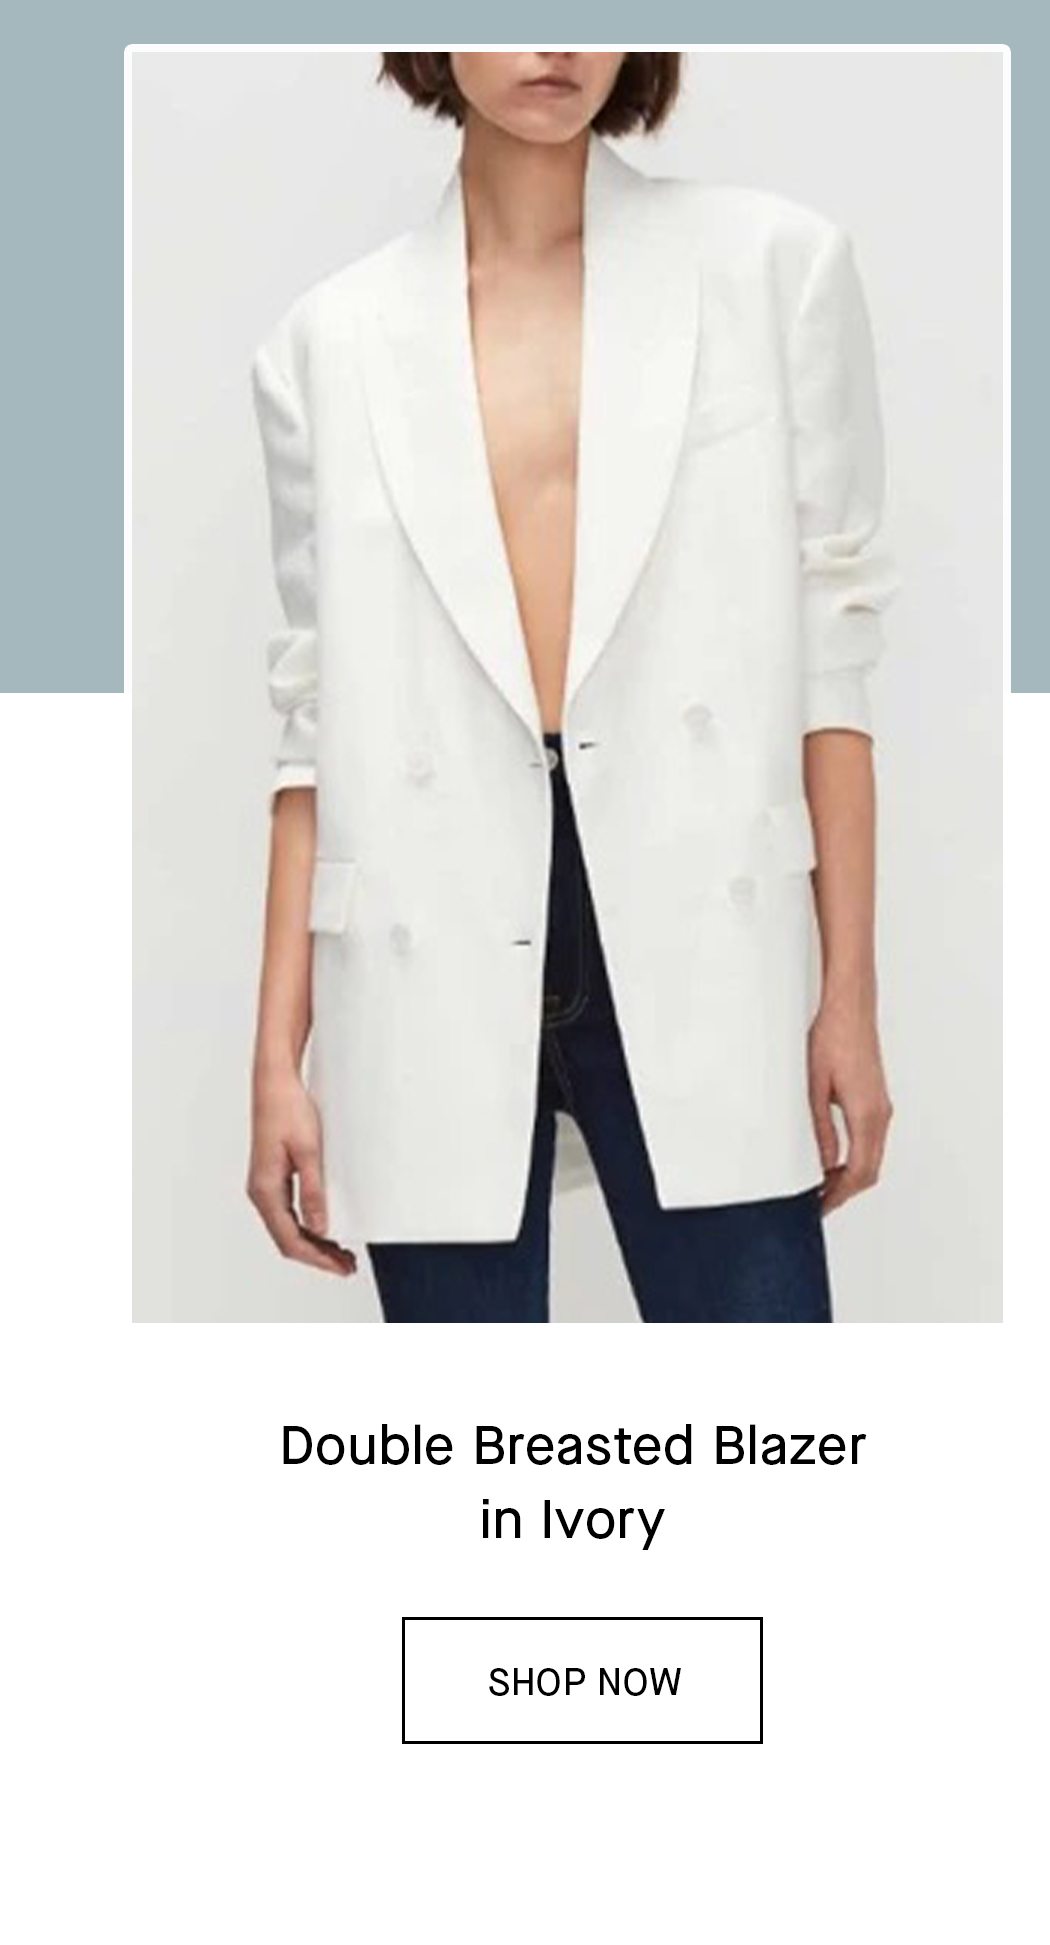 Double Breasted Blazer in Ivory